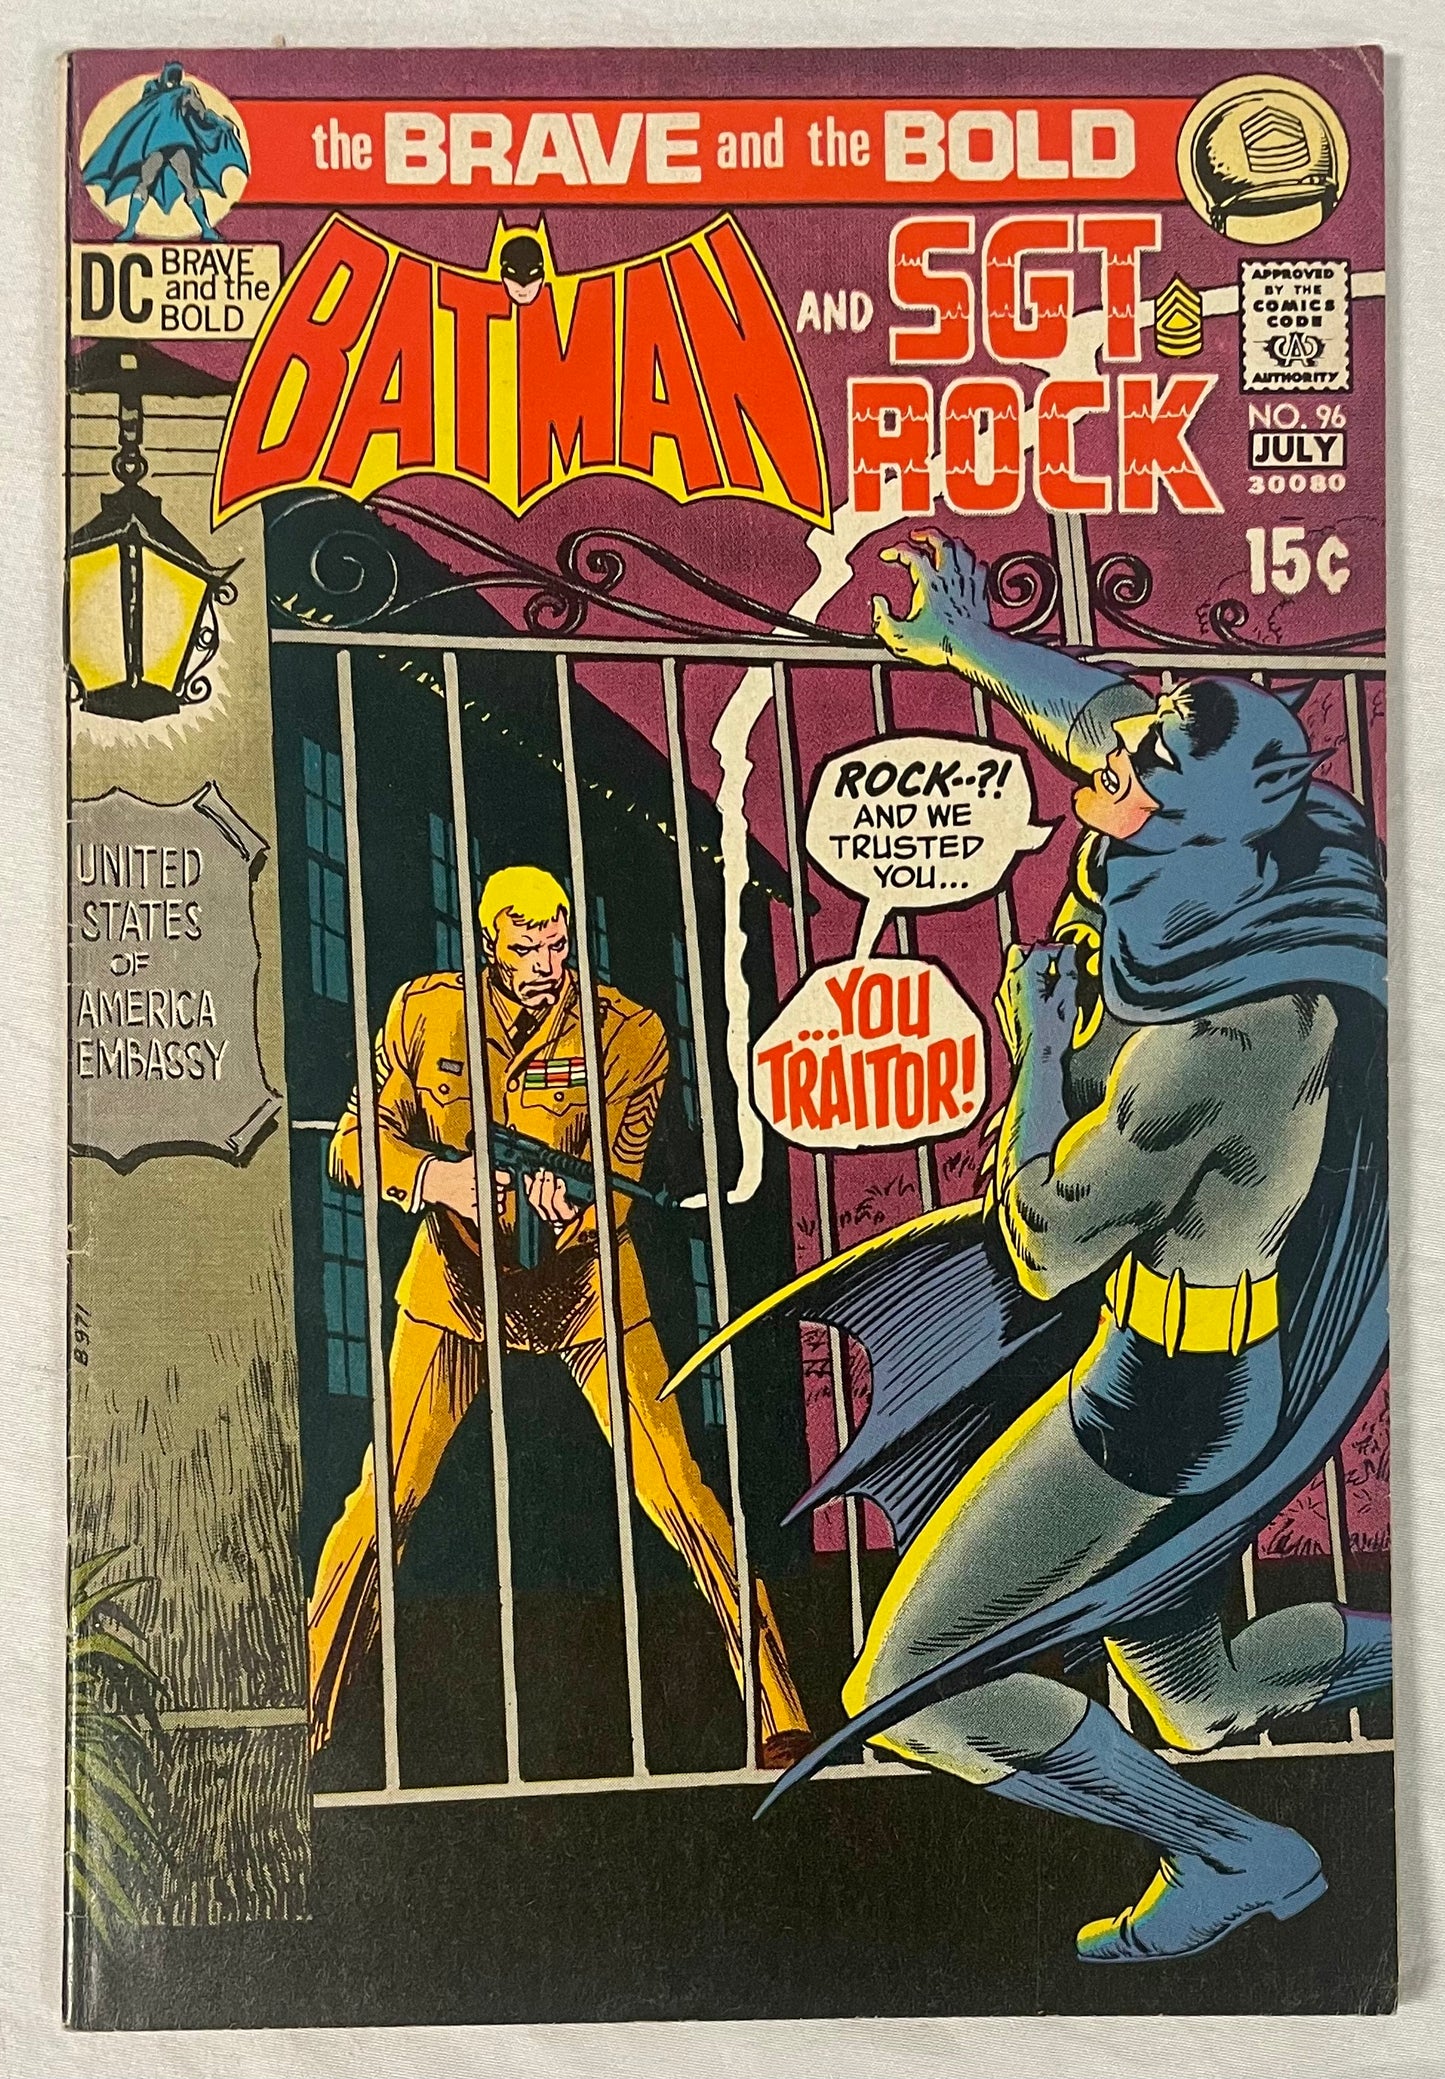 DC Comics The Brave and the Bold No. 96